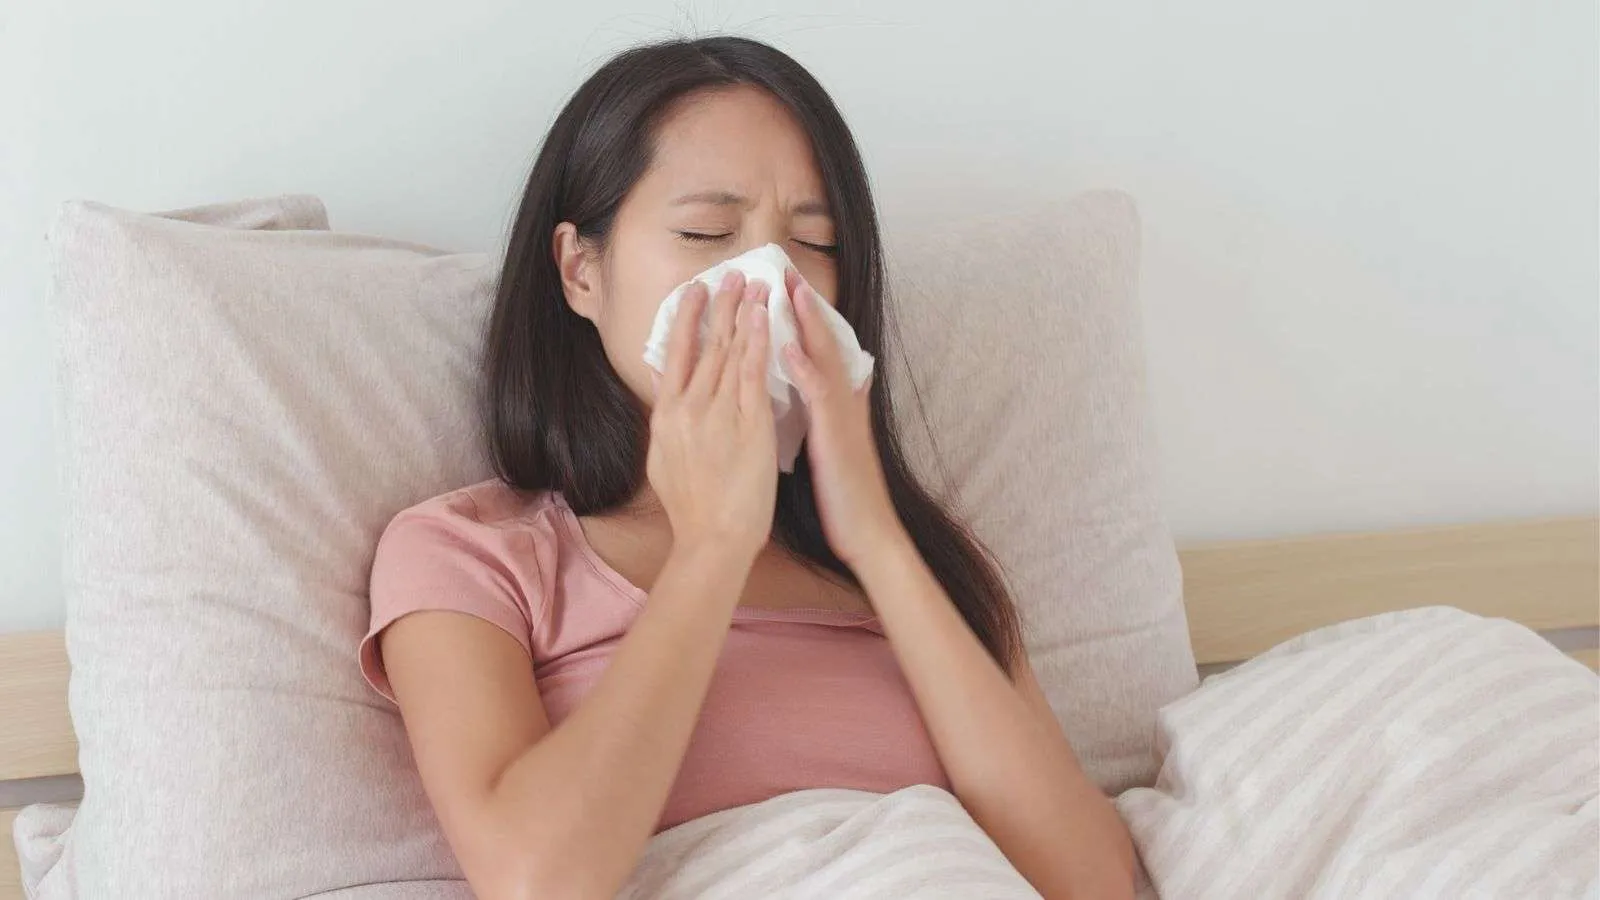 Allergies at home - bighomeprojects.com